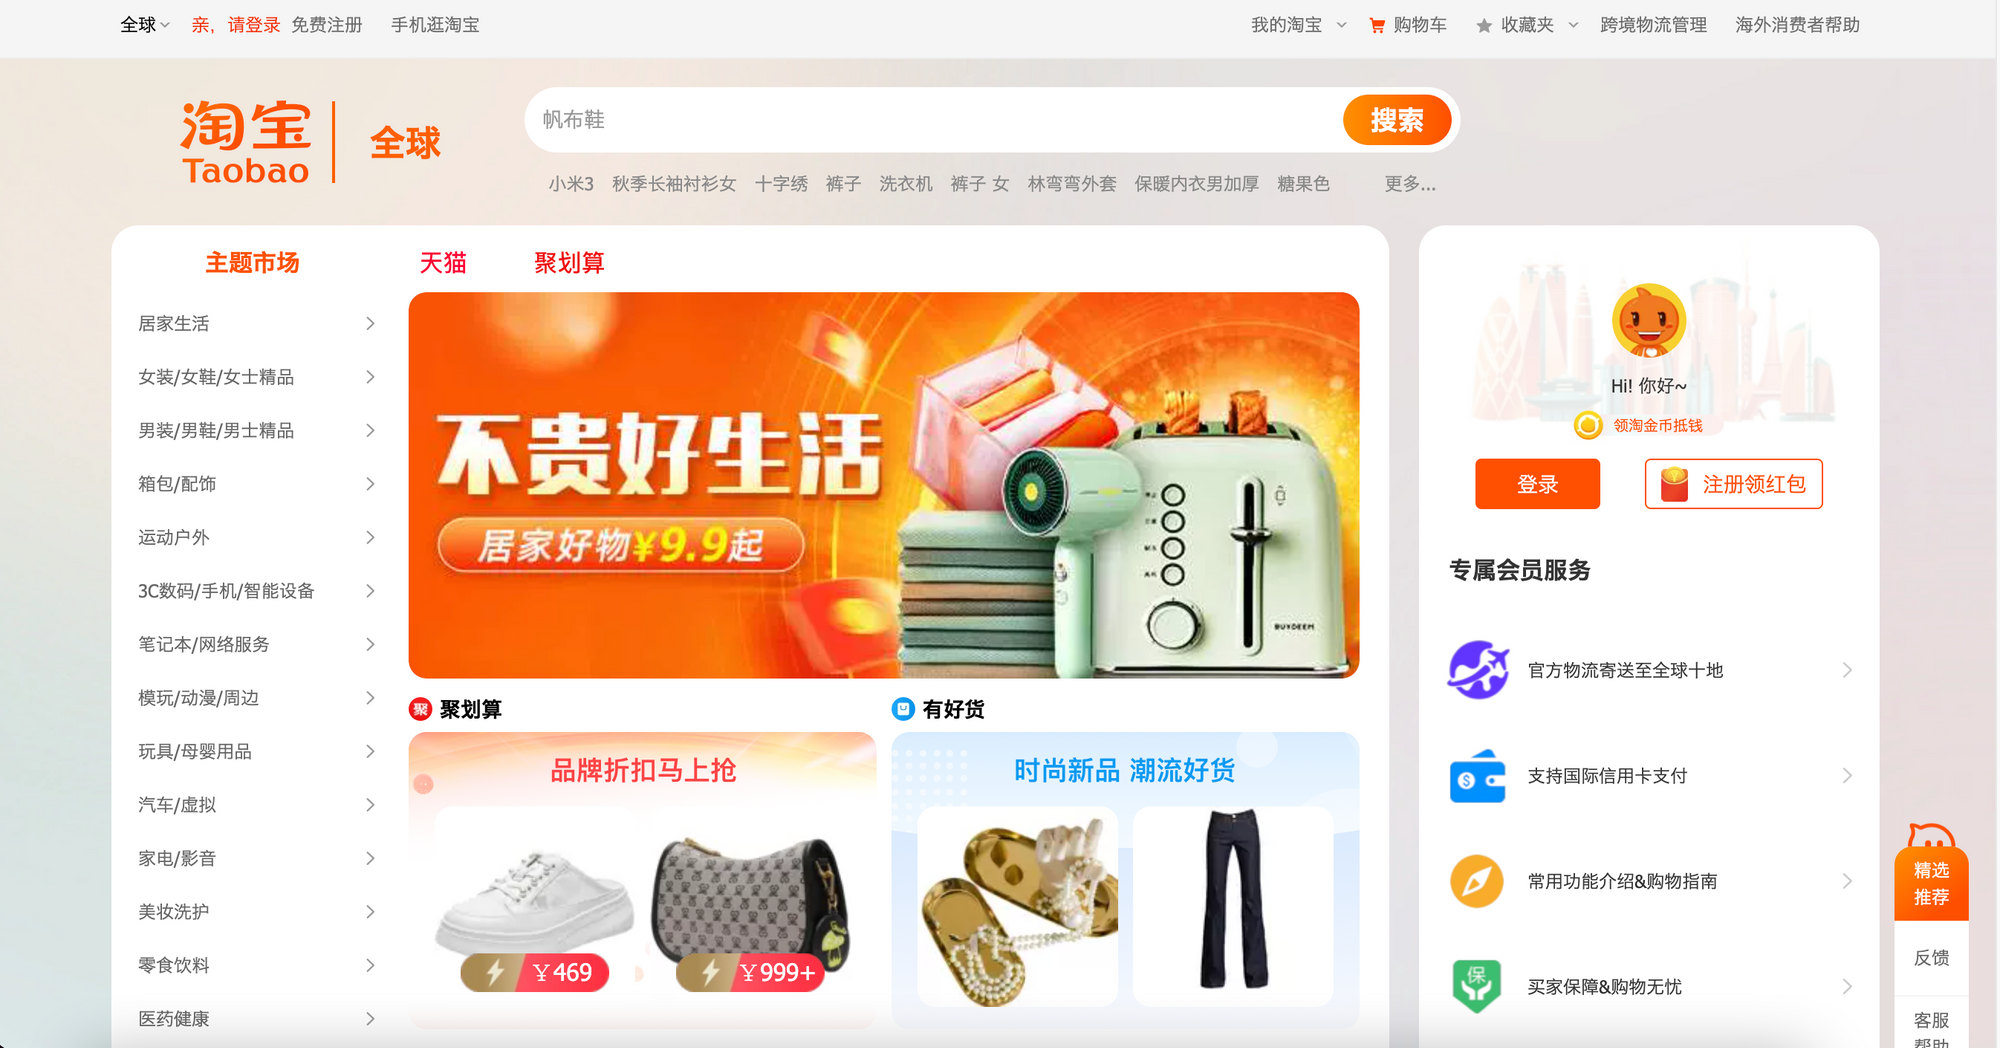 Why Alibaba is actually an advertising company